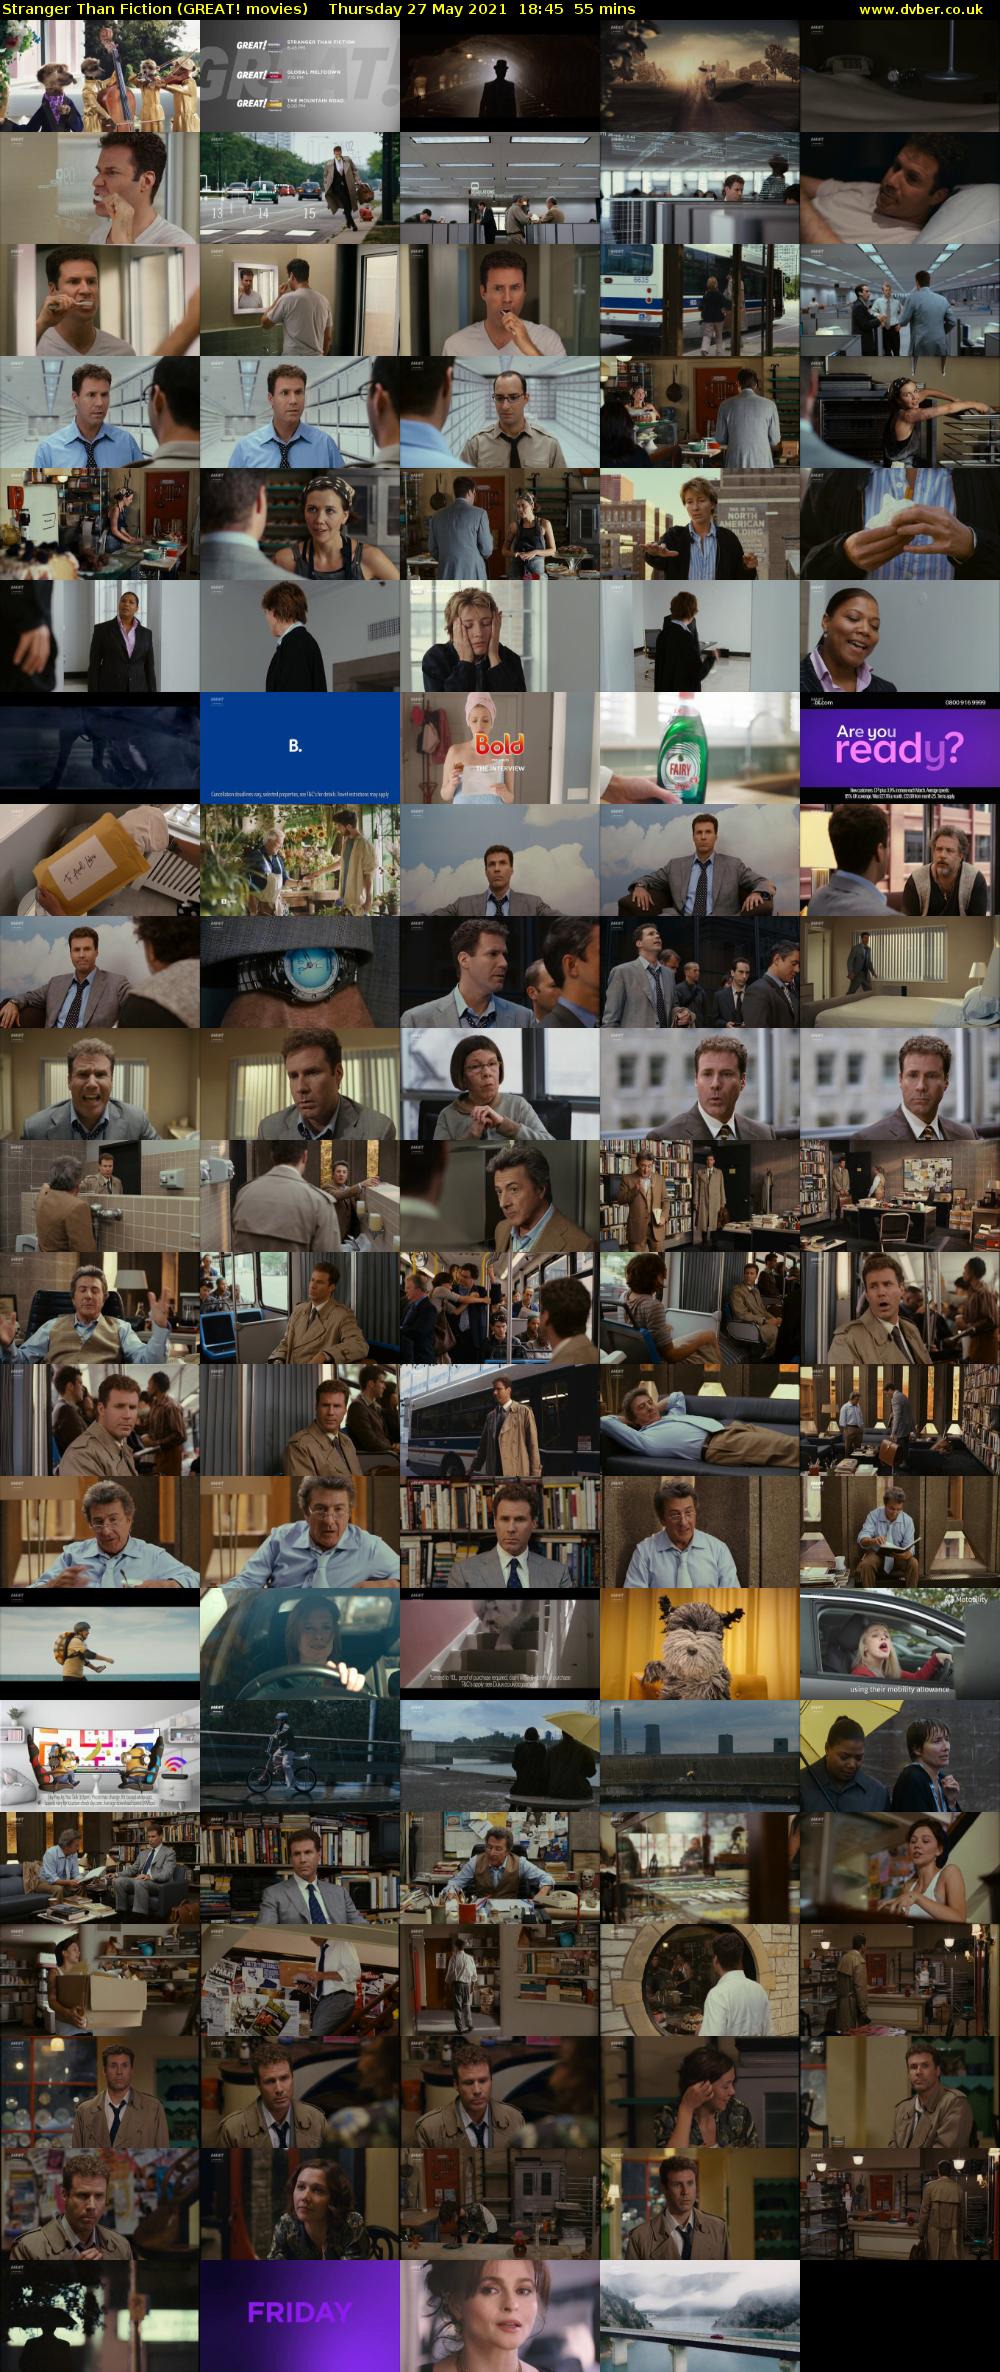 Stranger Than Fiction (GREAT! movies) Thursday 27 May 2021 18:45 - 19:40